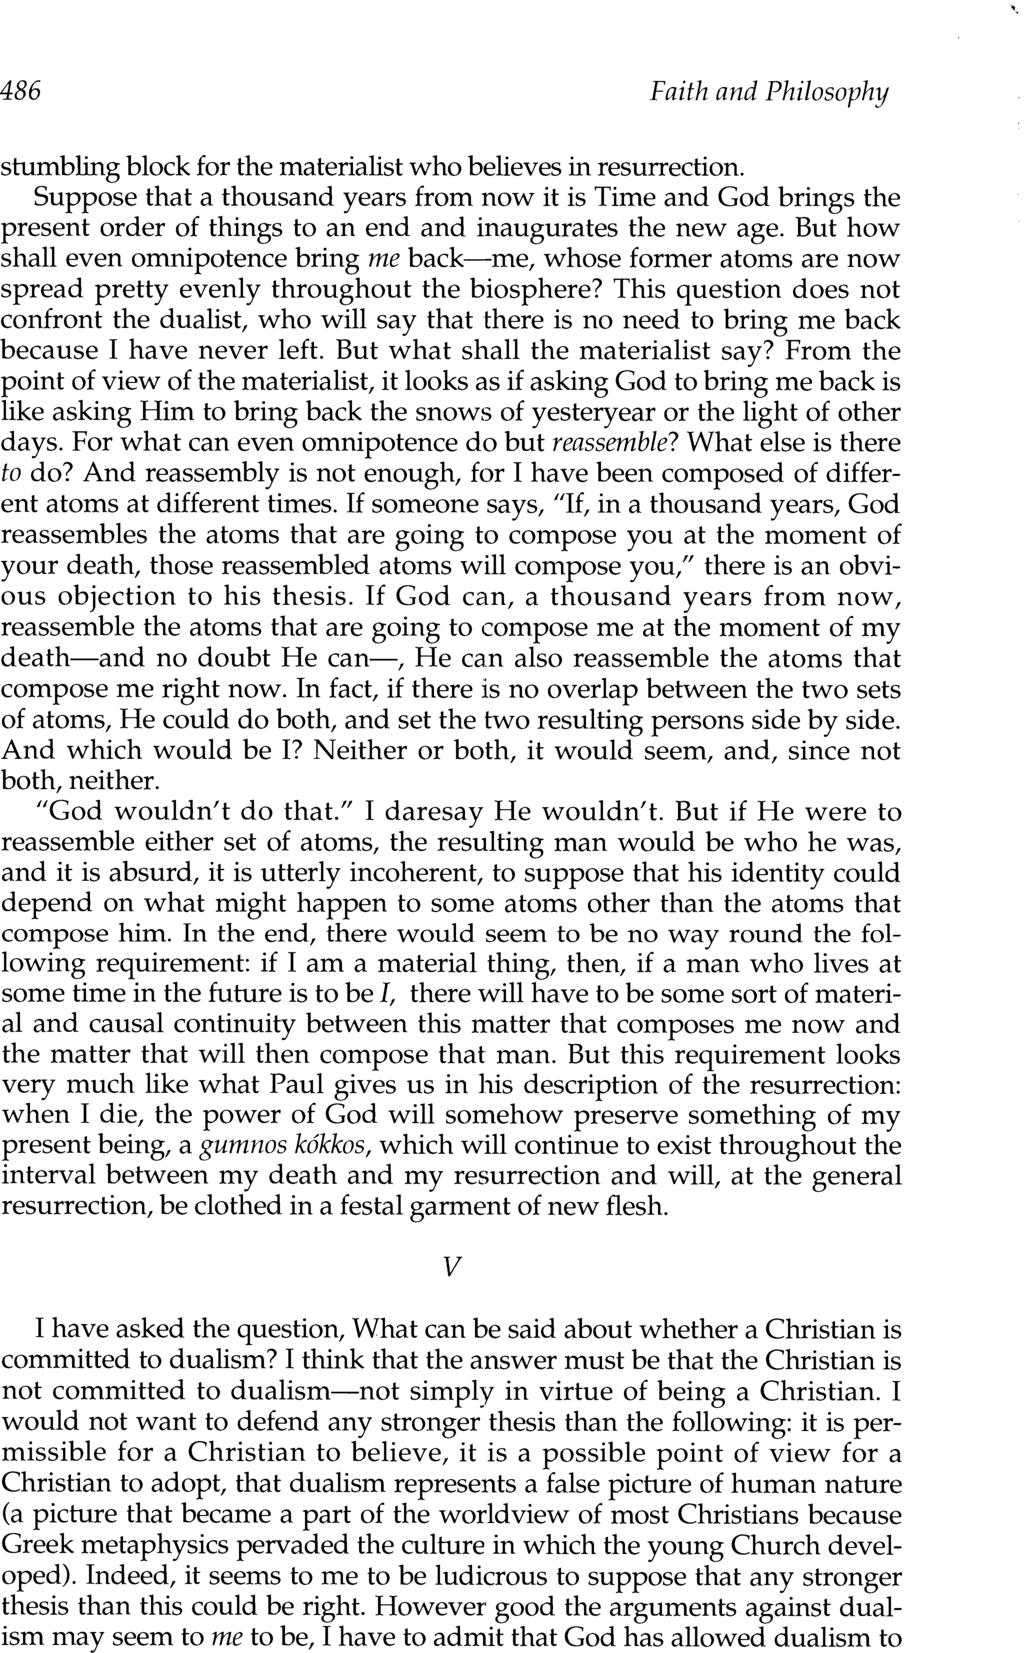 This makes it sound as though Aquinas is thinking of the resurrection as involving a kind of reassembly.